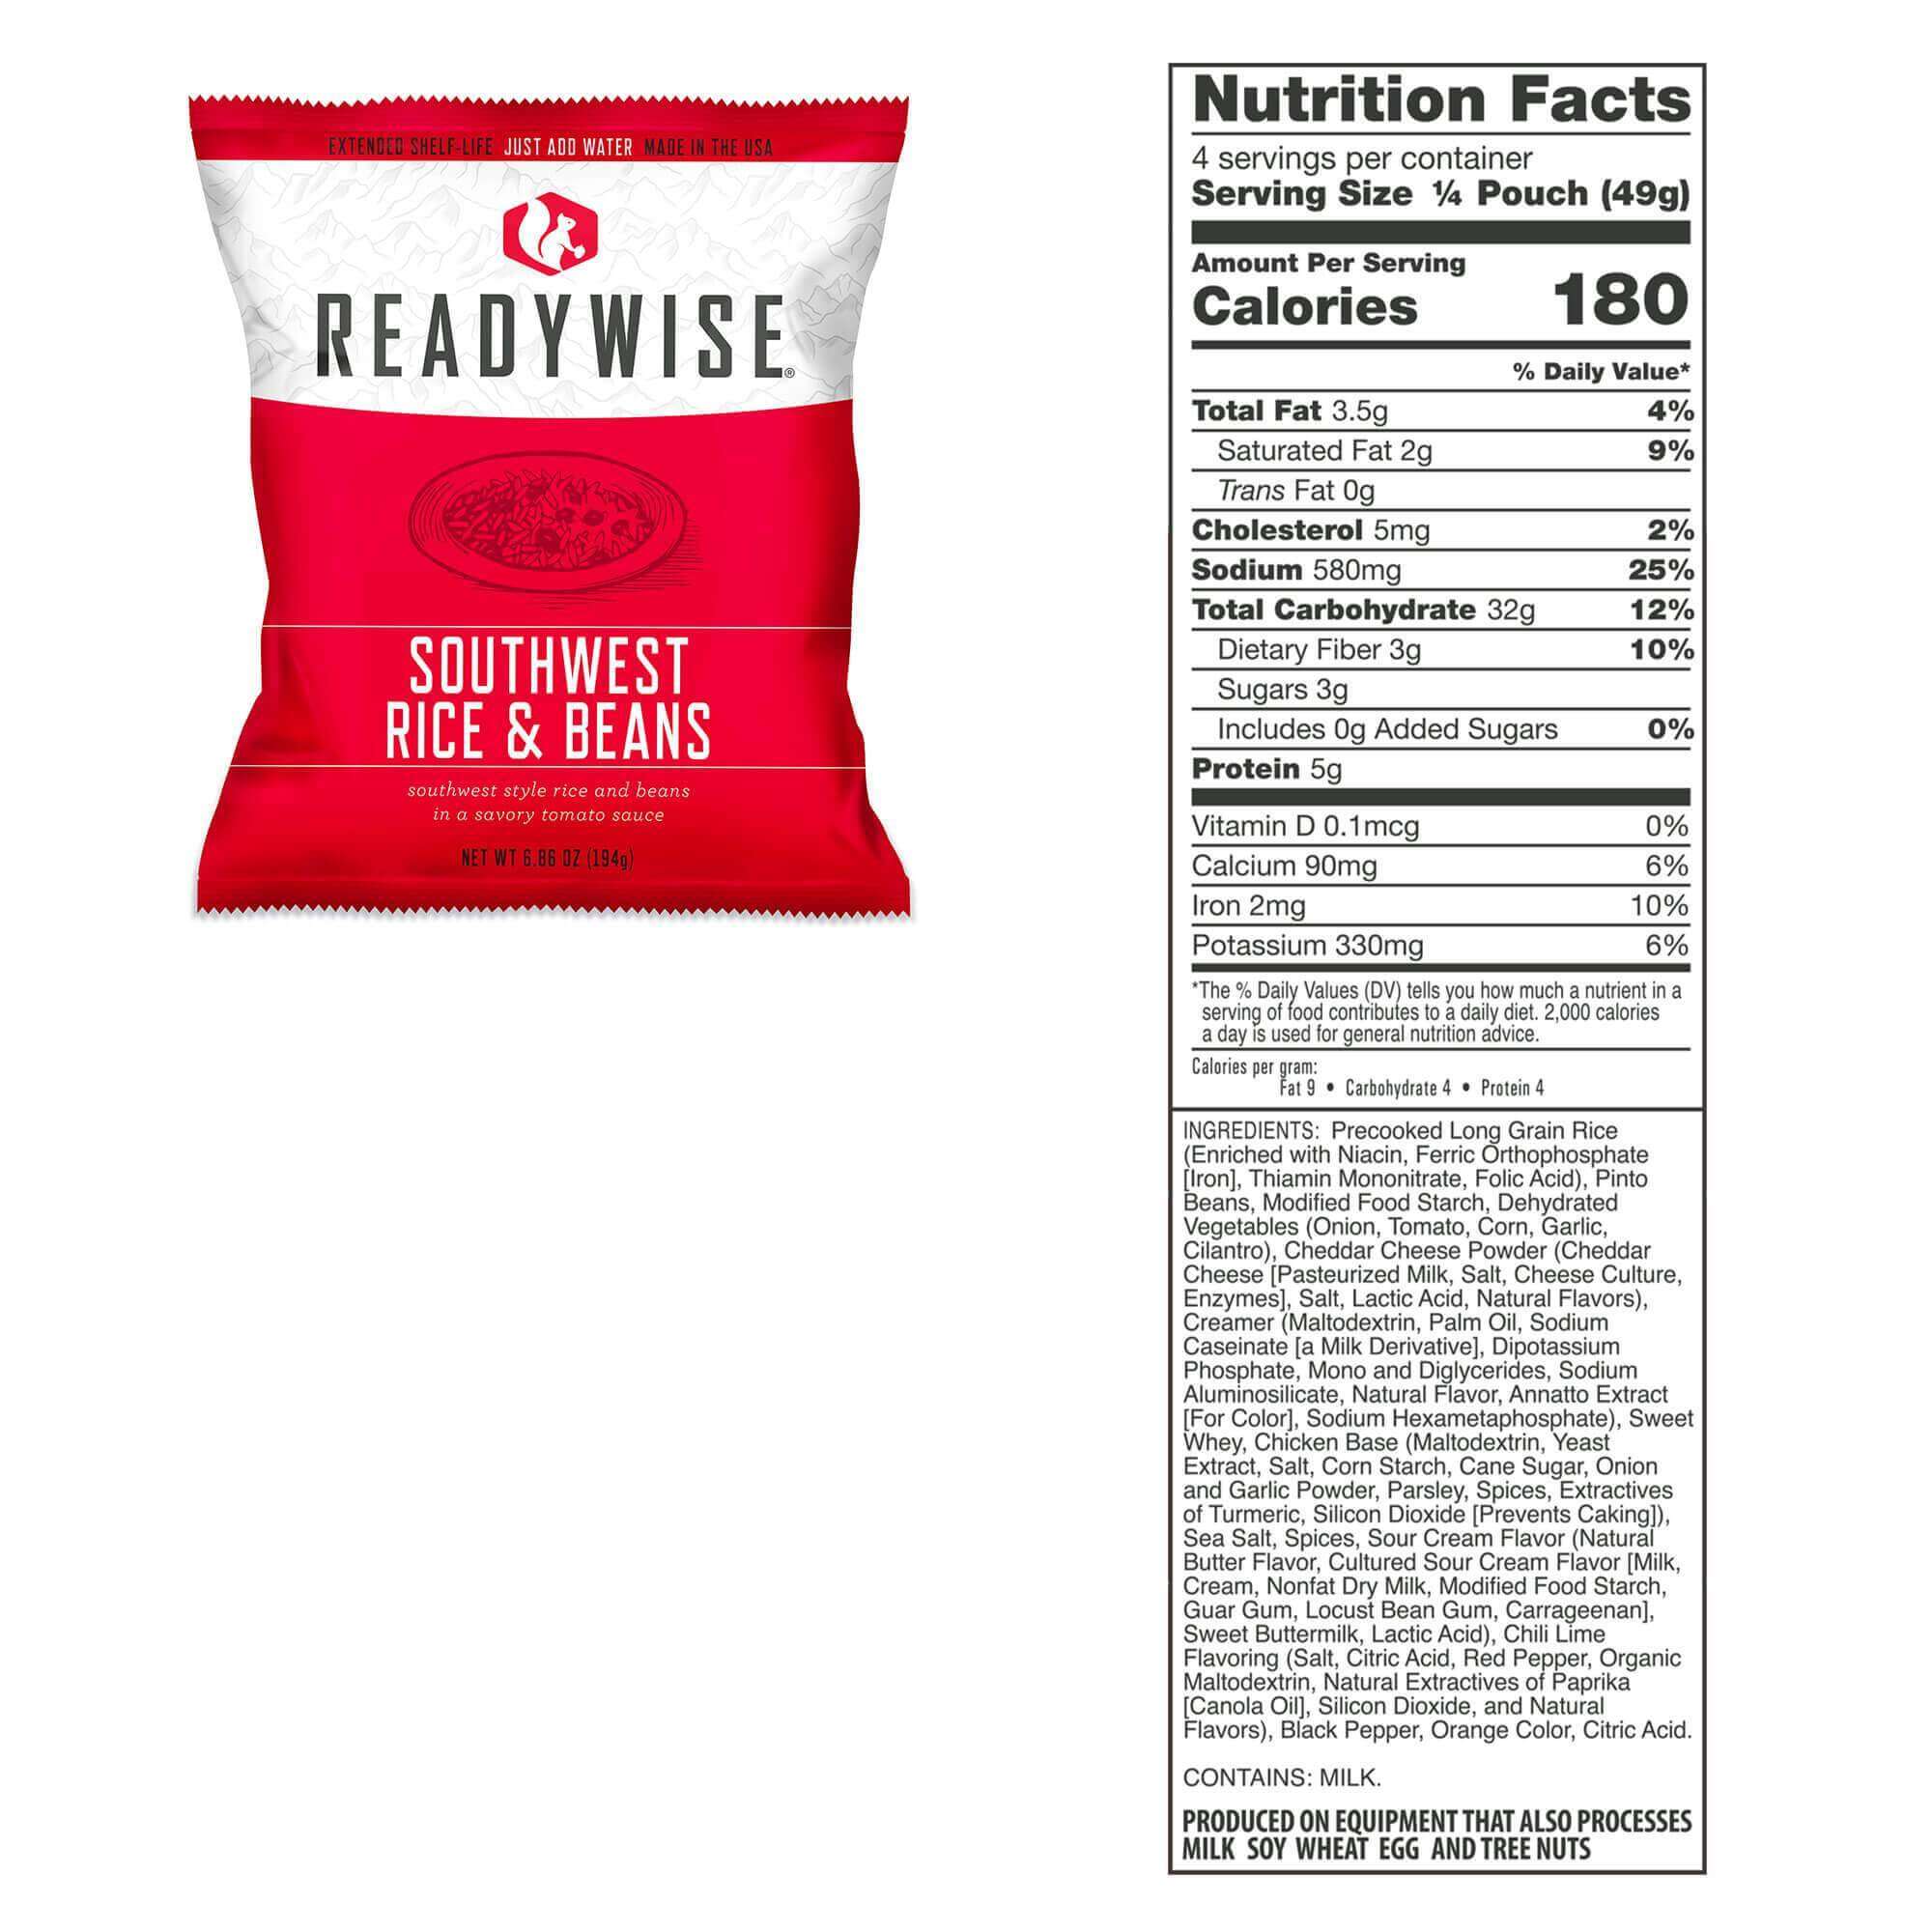 Readywise (formerly Wise Food Storage) 240 Serving Package - 40 lbs - Includes 1 - 120 Serving Entree Bucket and 1 - 120 Serving Breakfast Bucket (SHIPS IN 1-2 WEEKS)
Readywise Readywise Readywise Readywise Readywise Readywise Readywise Readywise Readywise
ReadyWise (formerly Wise Food Storage)